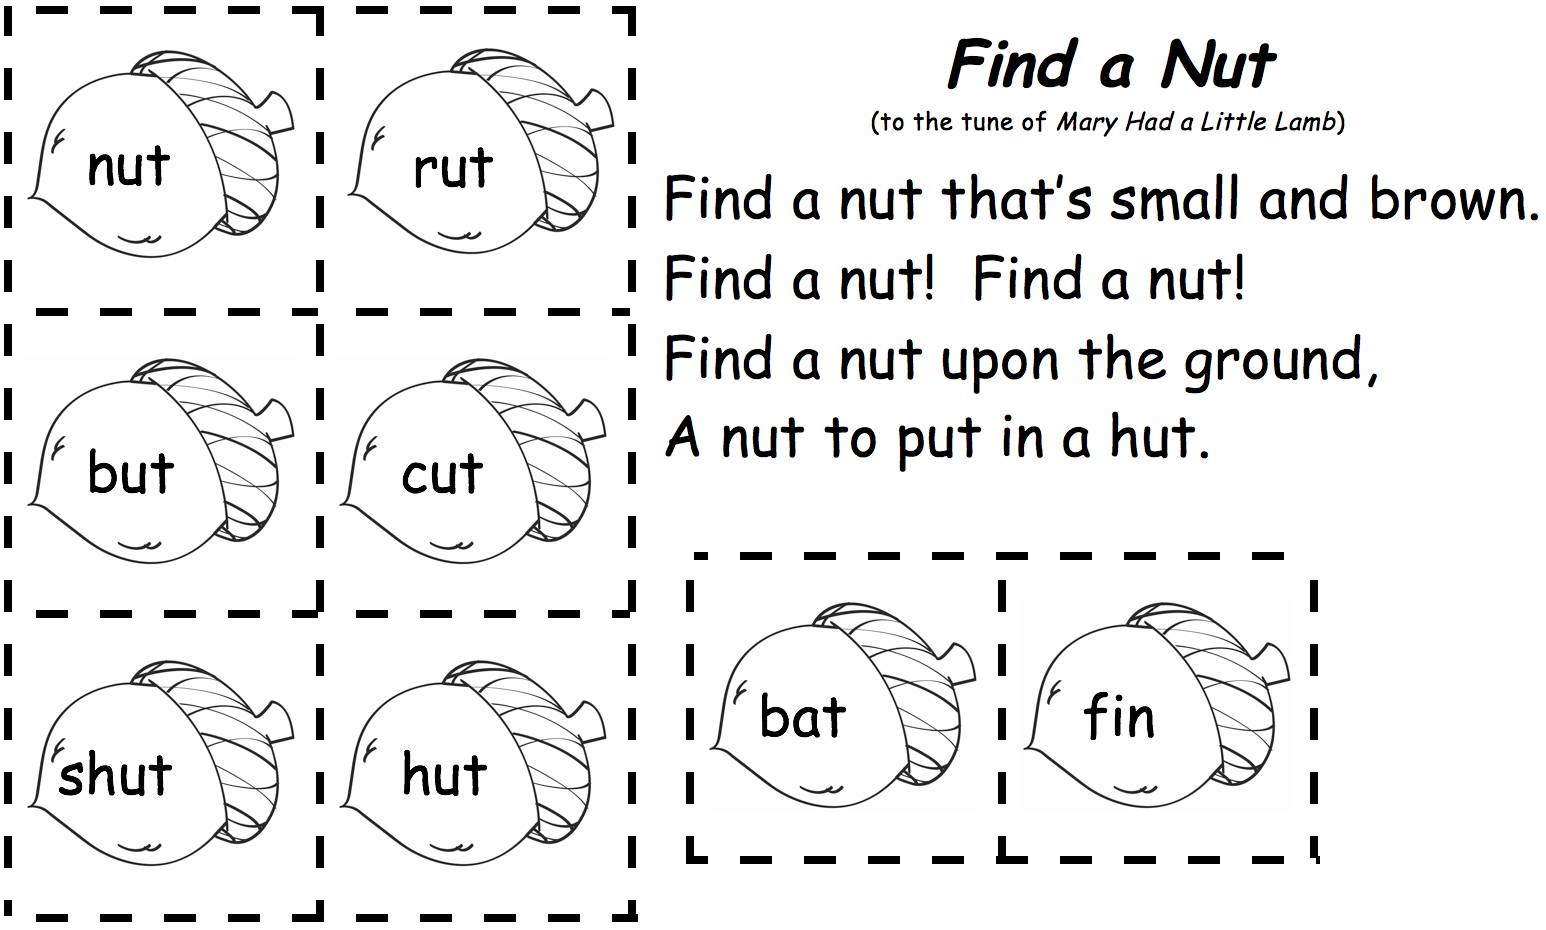 nut-song-and-word-cards